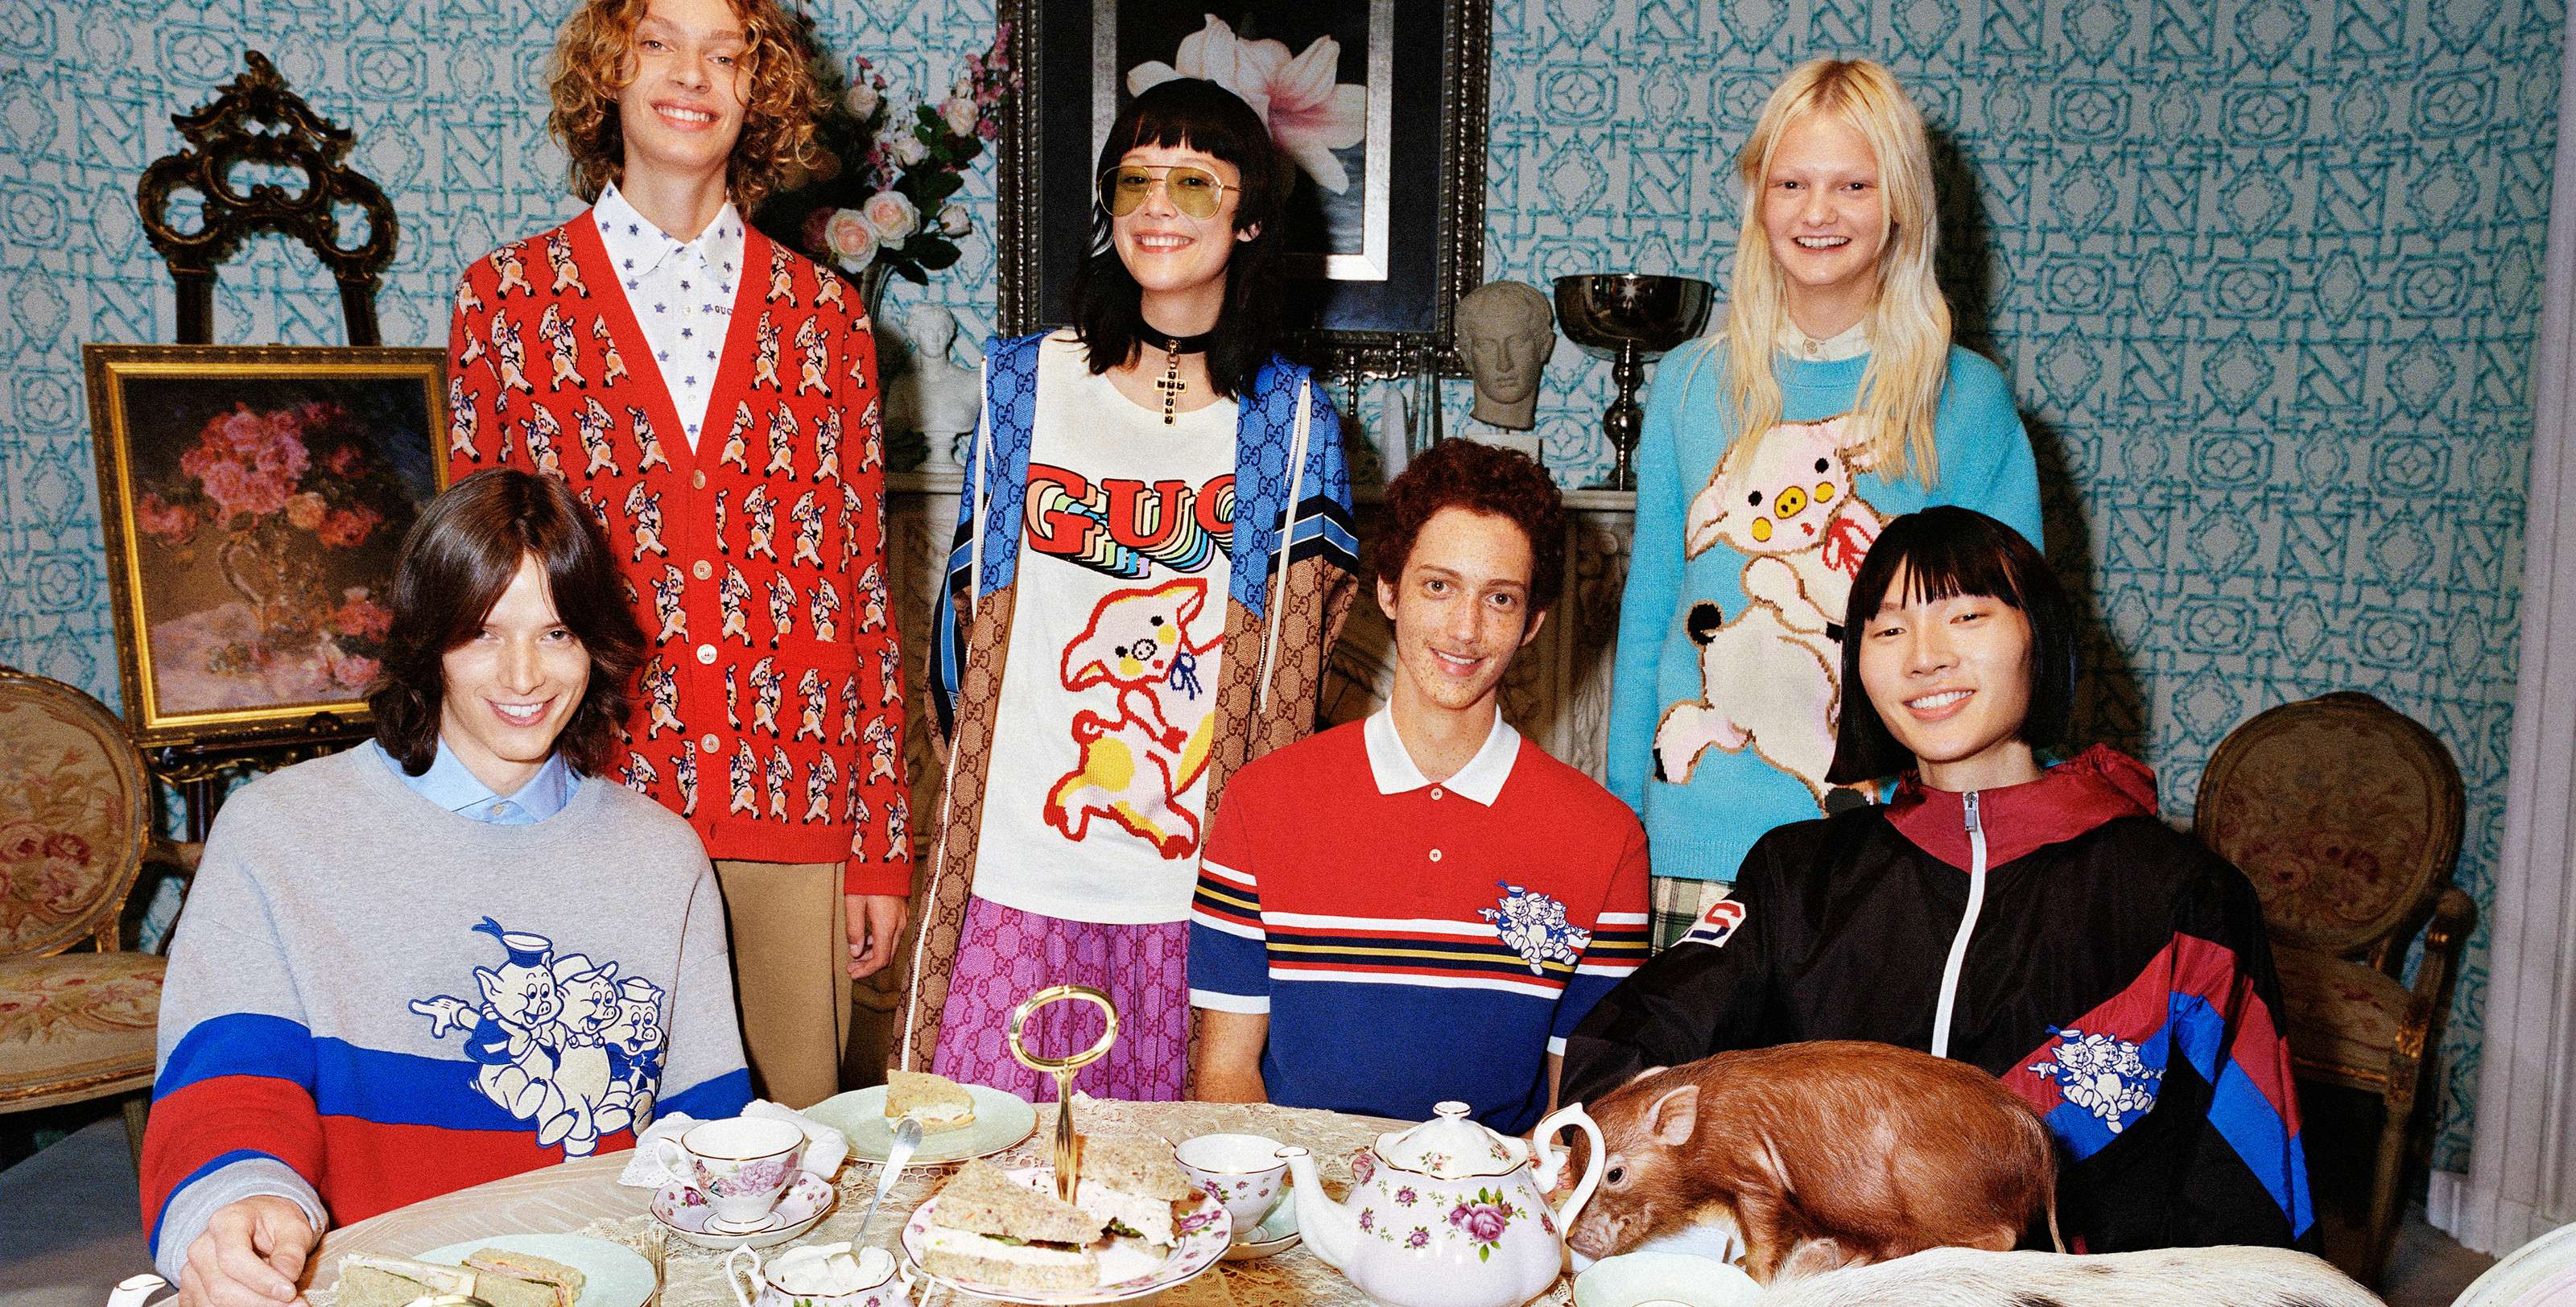 Gucci Celebrates Year of the Pig With Special Collection